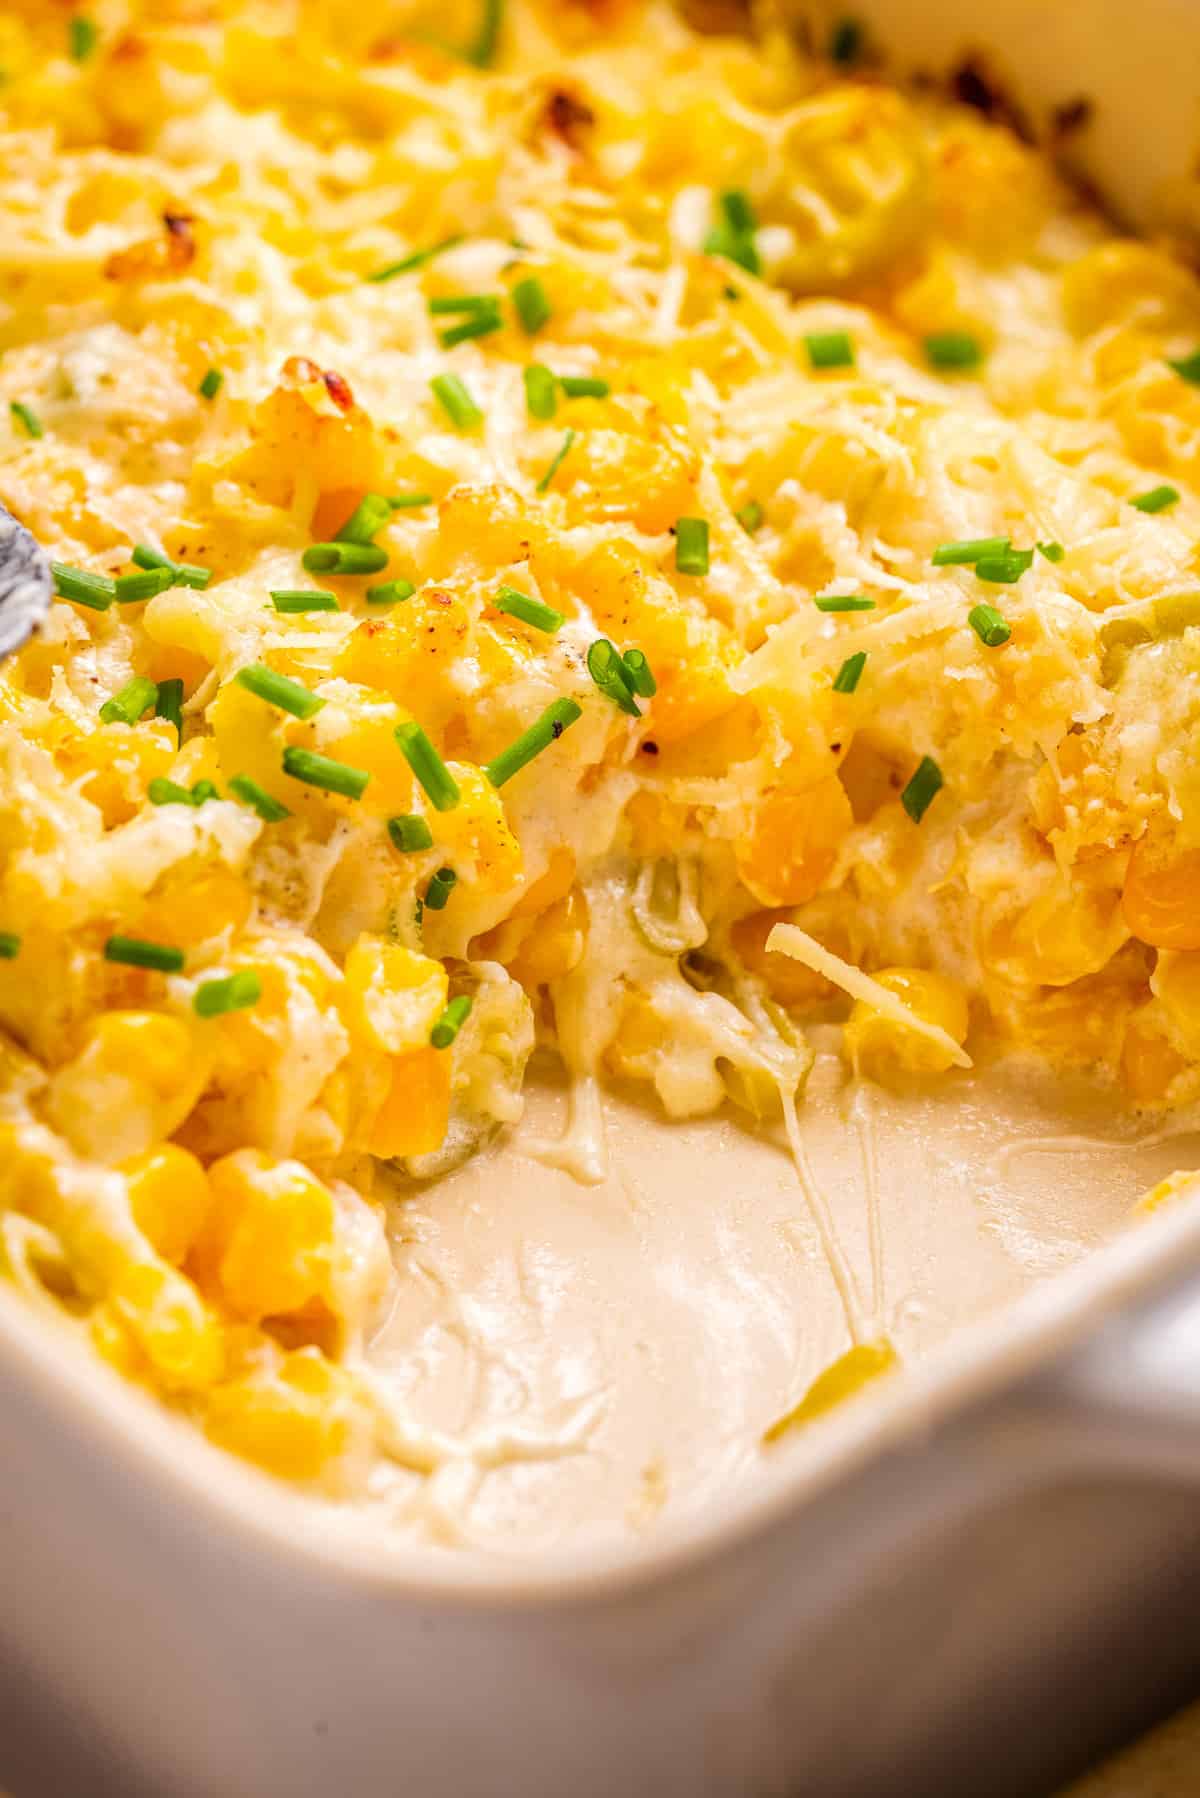 A close up image of corn casserole with cream cheese, with a portion taken out